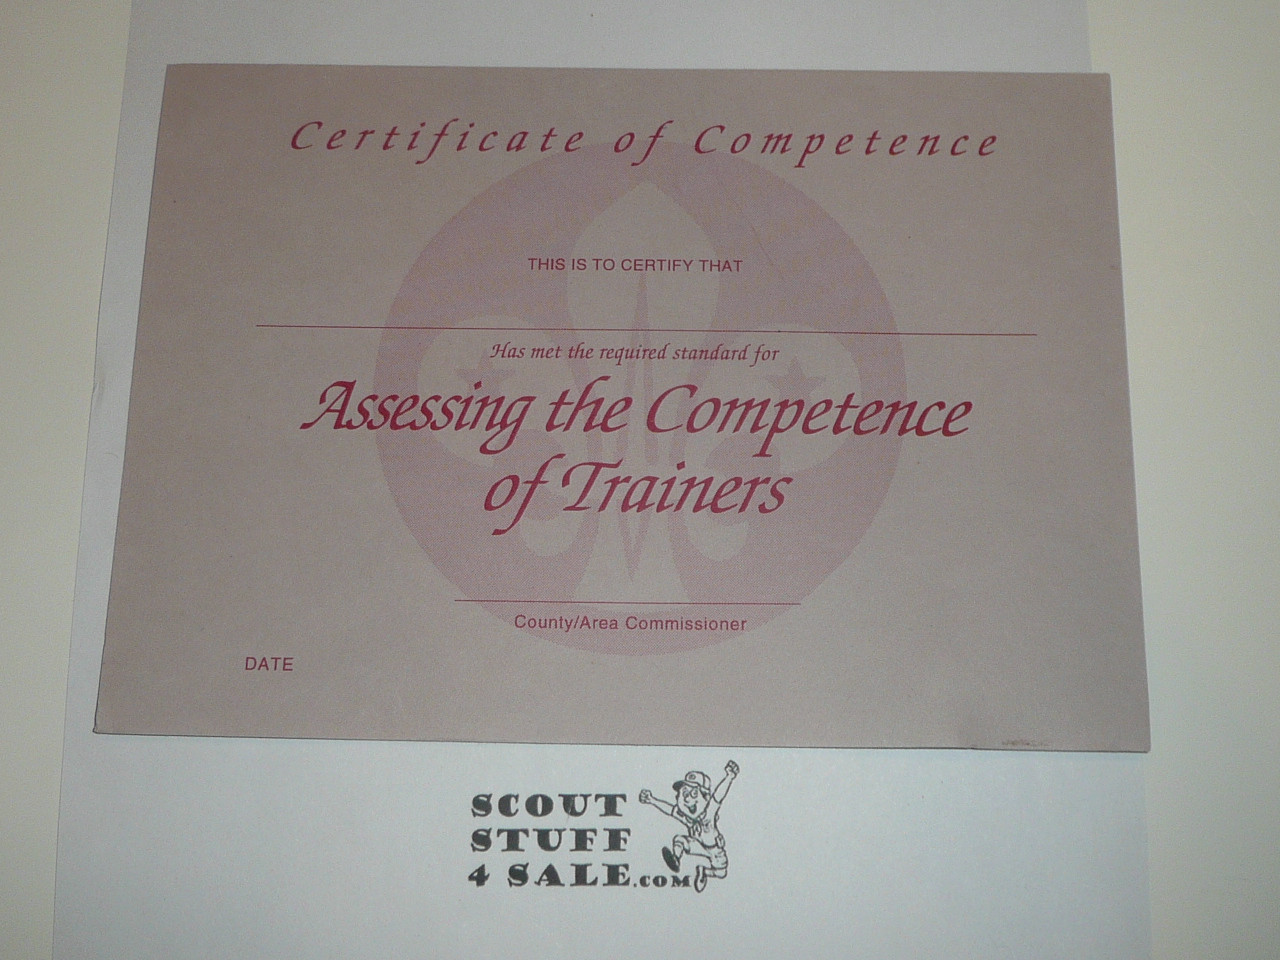 British Certificate of Competence